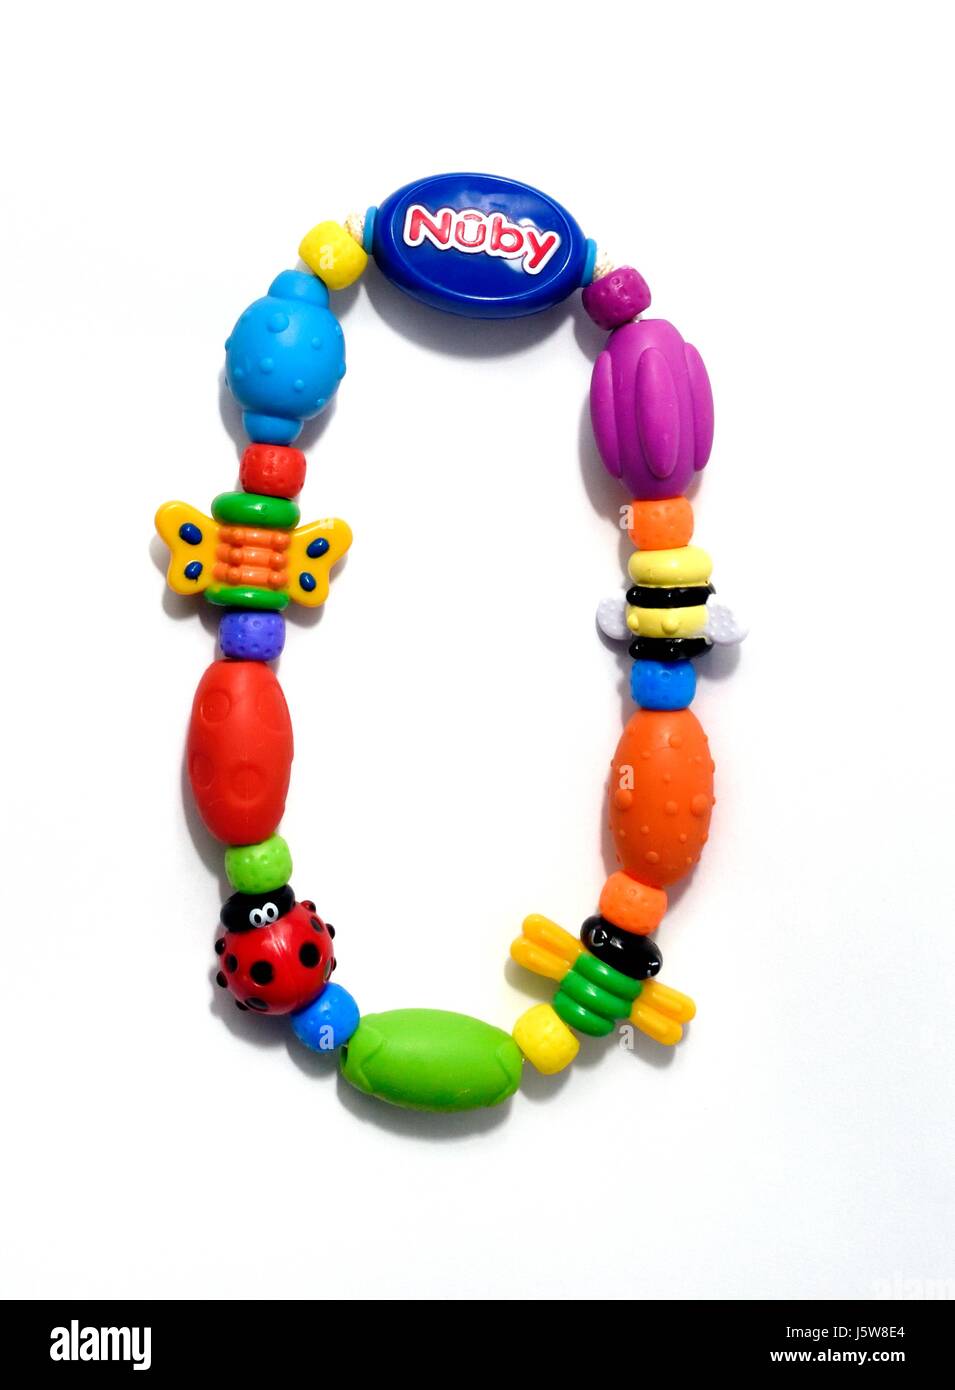 Nuby BugaLoop Teether Toy Stock Photo